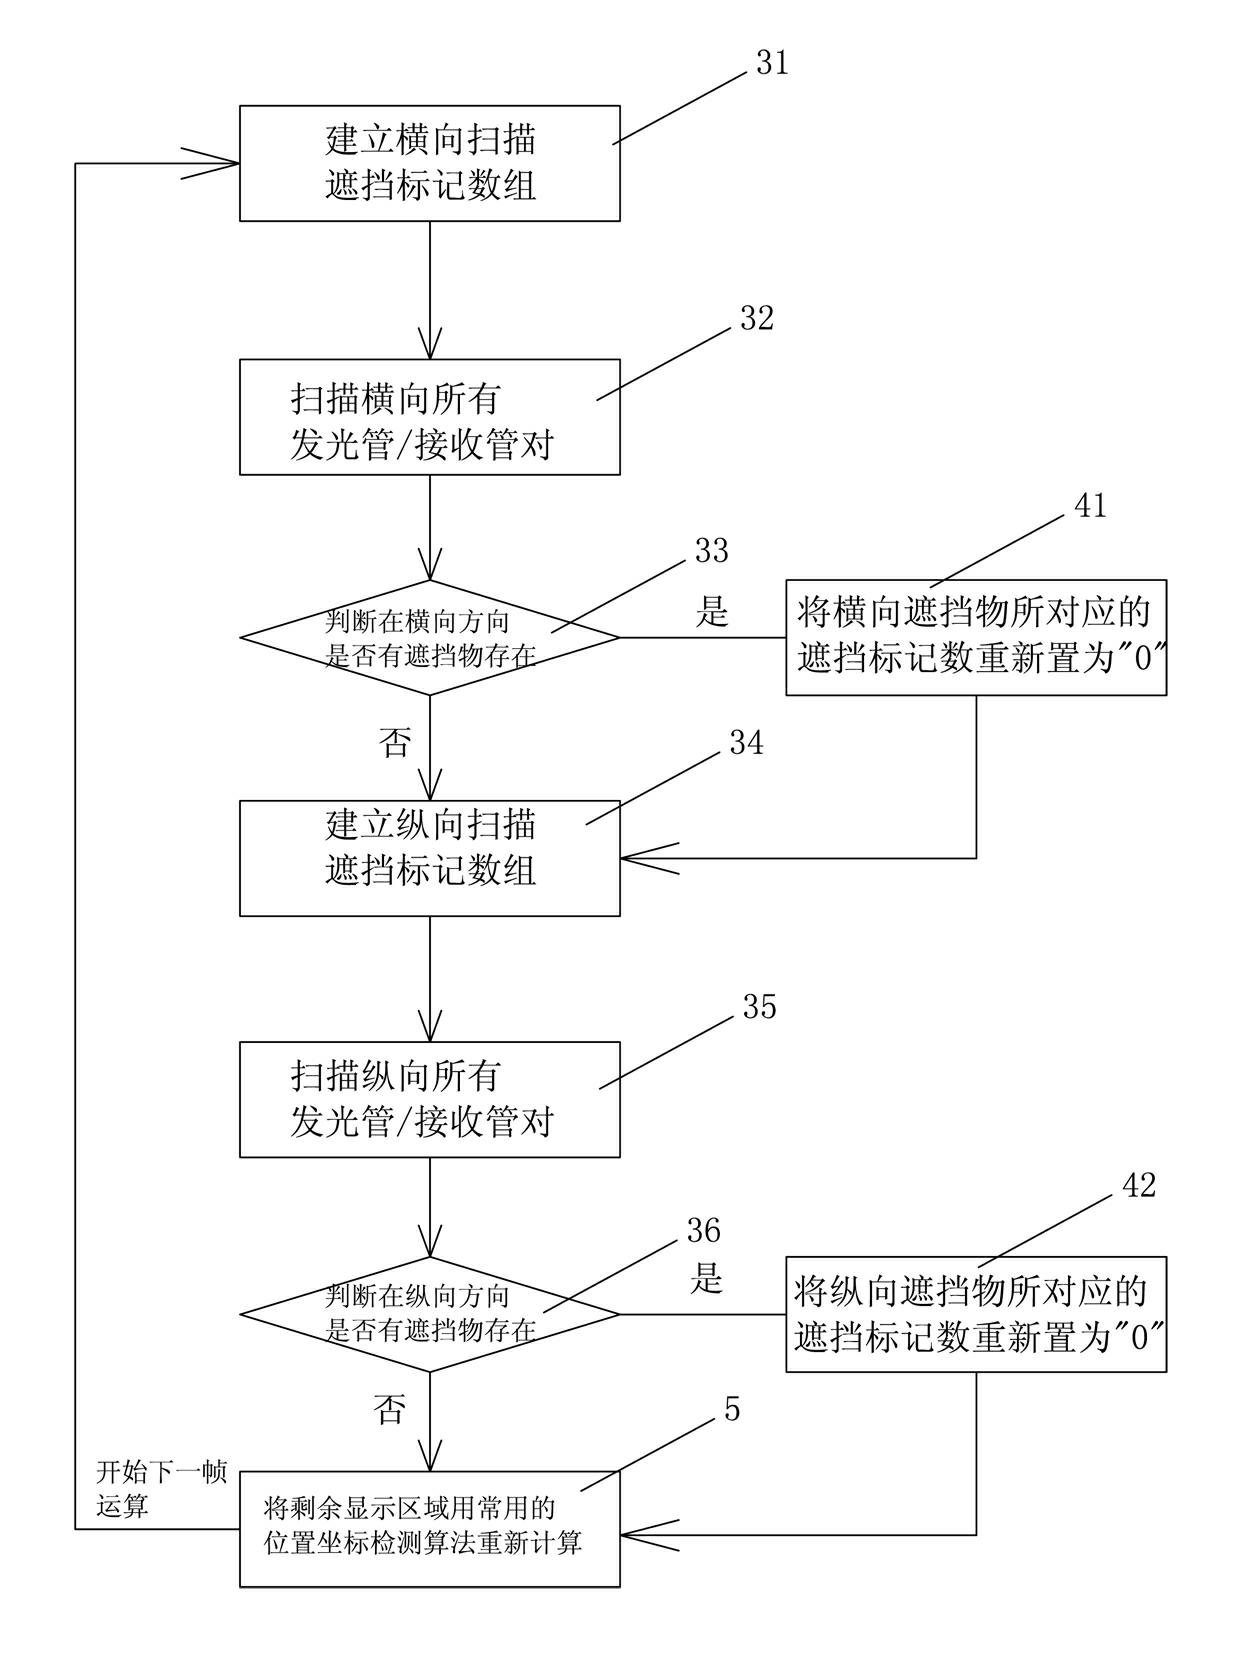 Method for eliminating non-normal contact interference in infrared touch system